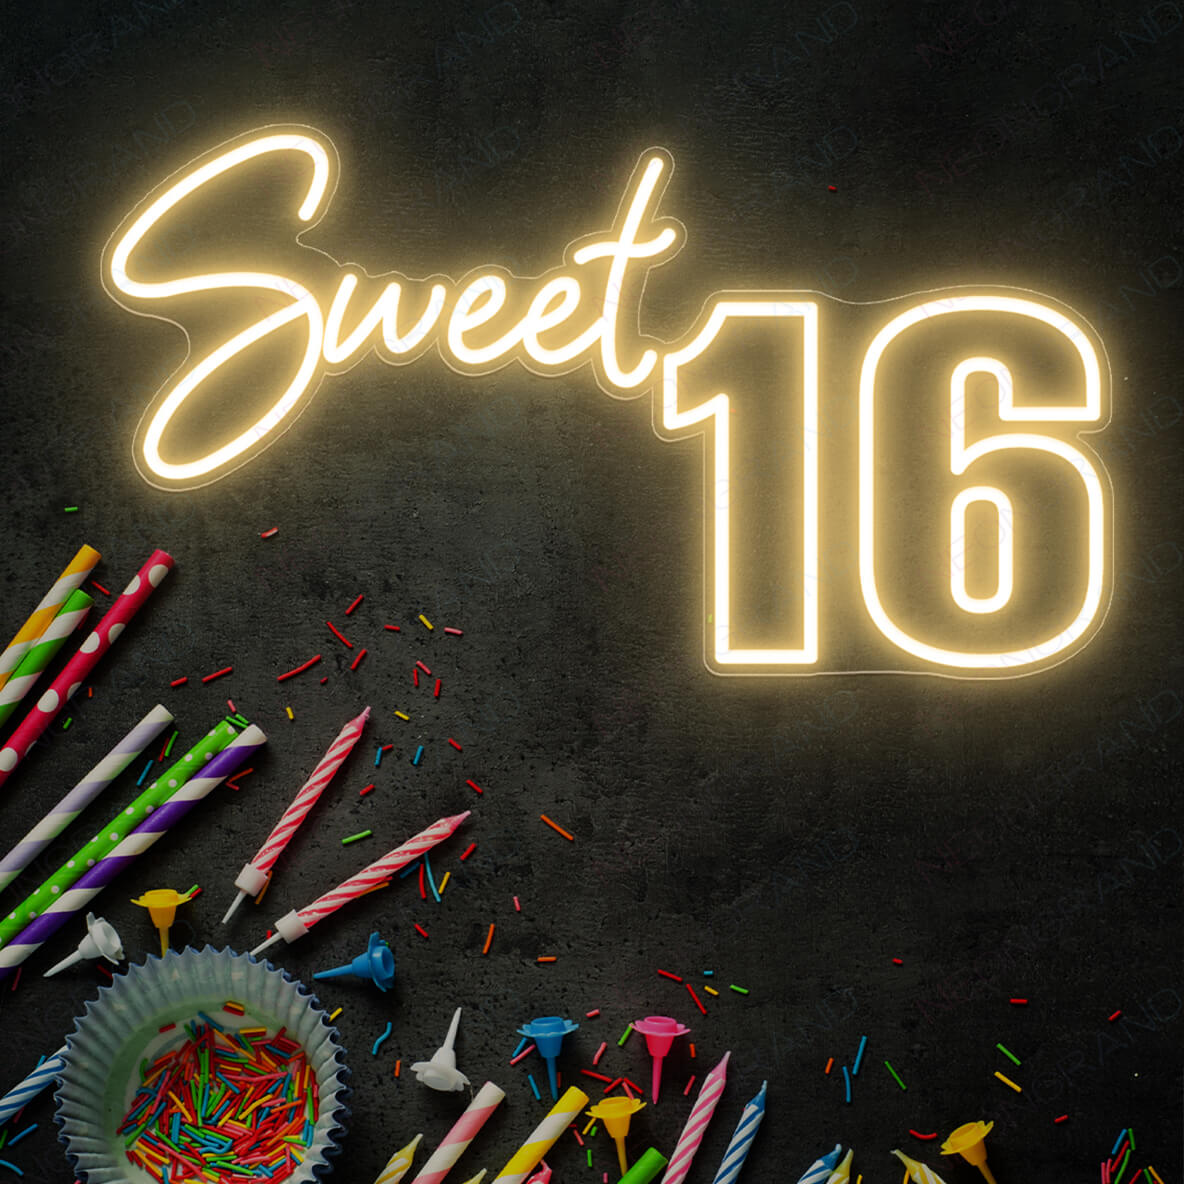 Sweet 16 Neon Sign Happy Birthday Party Led Light gold yellow